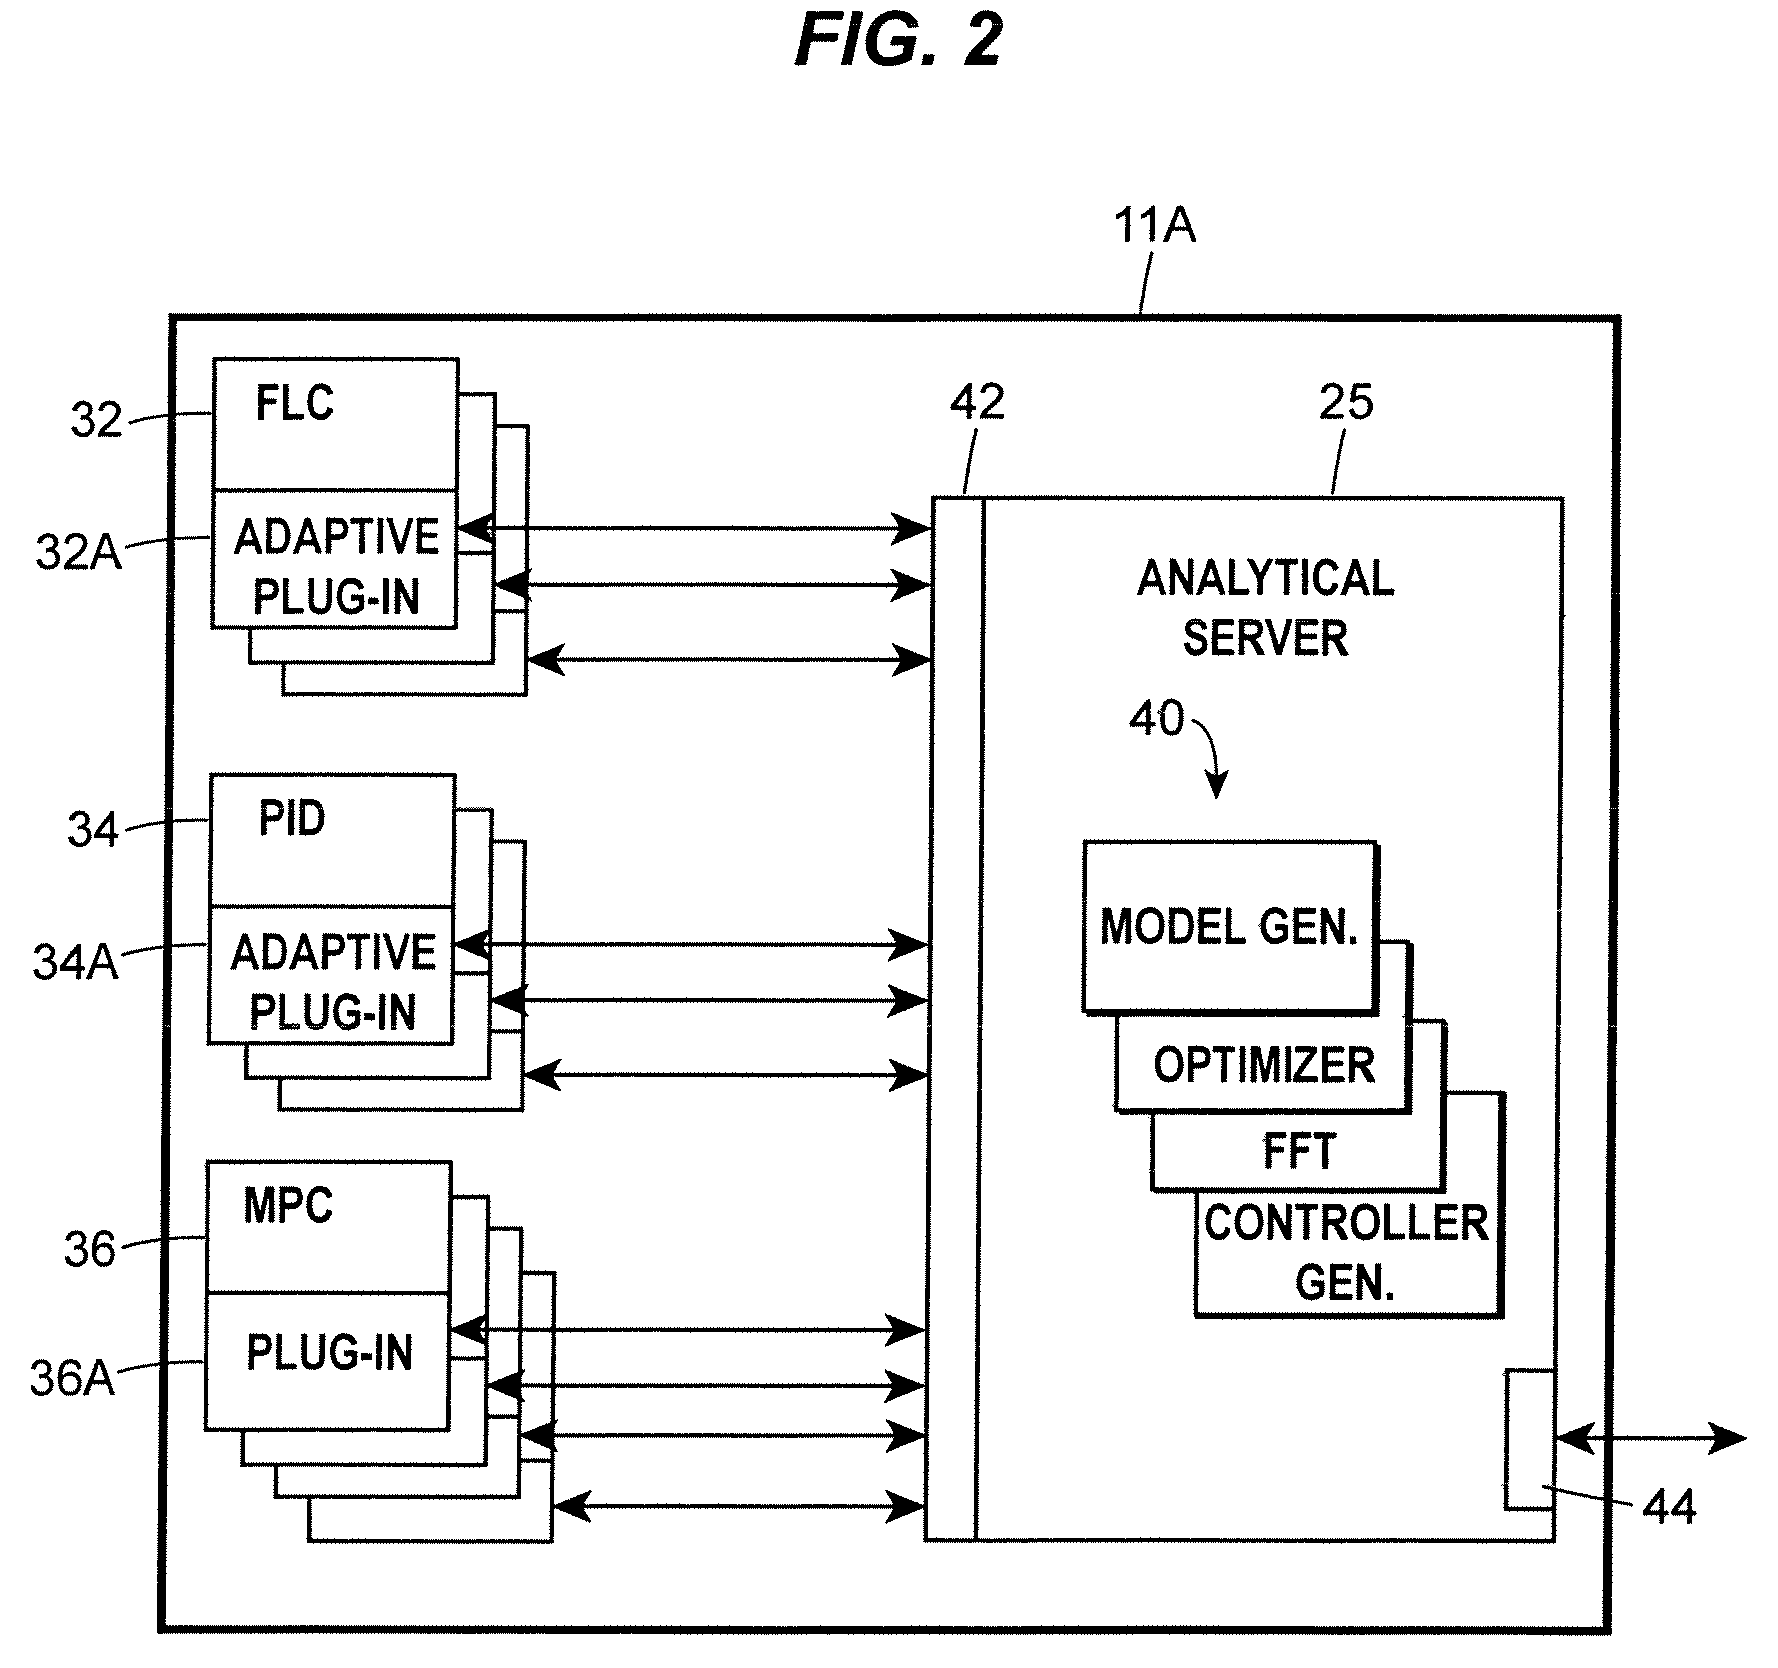 Analytical server integrated in a process control network